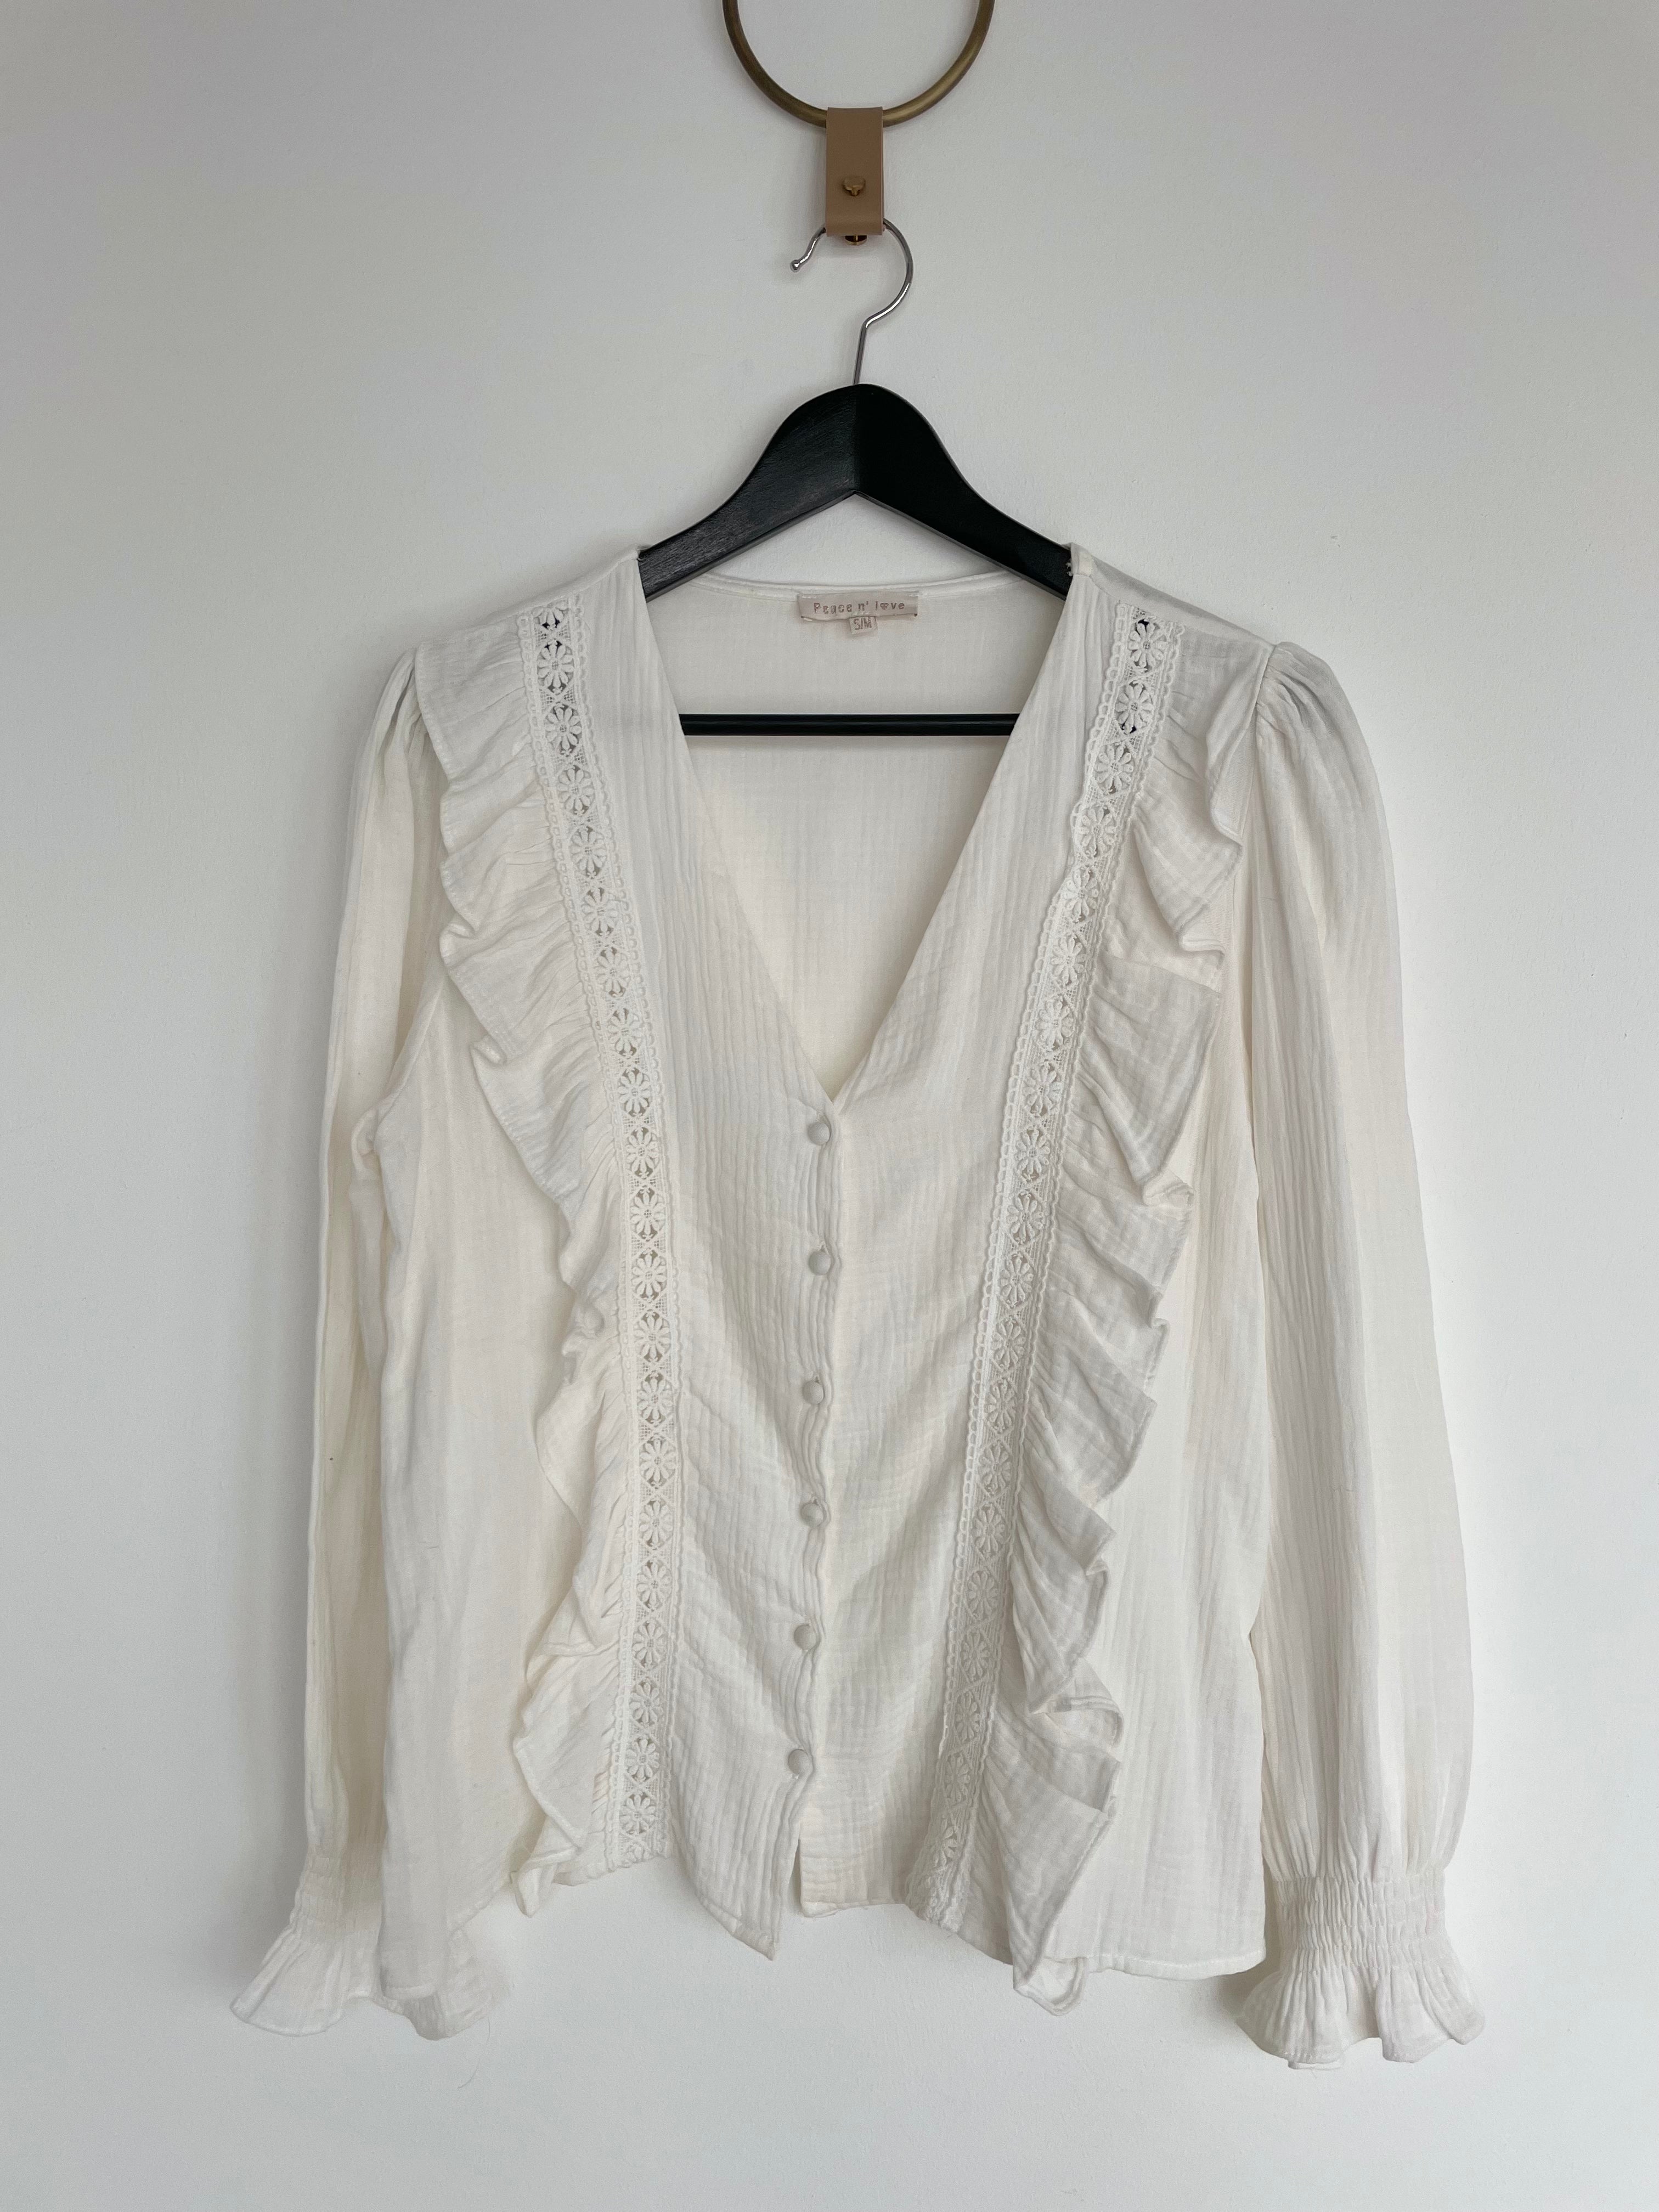 Ivory lace shirt - PEACE AND LOVE - S/M